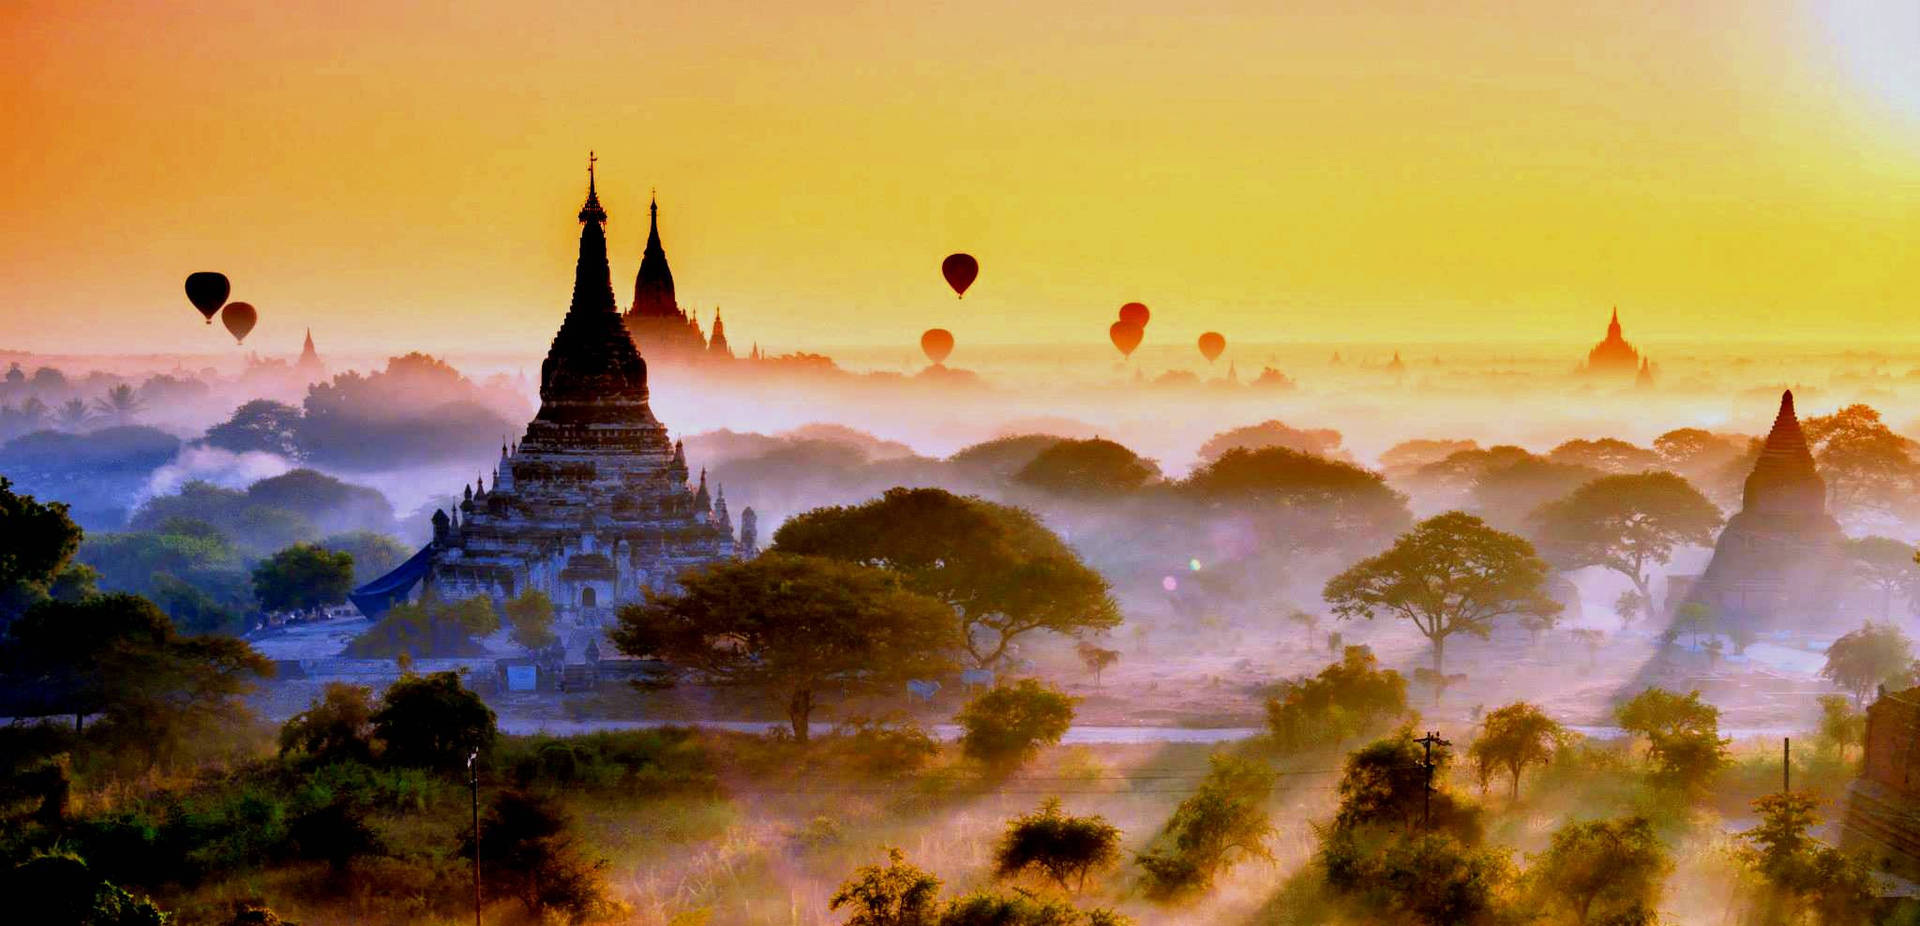 Caption: A Majestic View Of Yangon Ancient City At Dusk Background